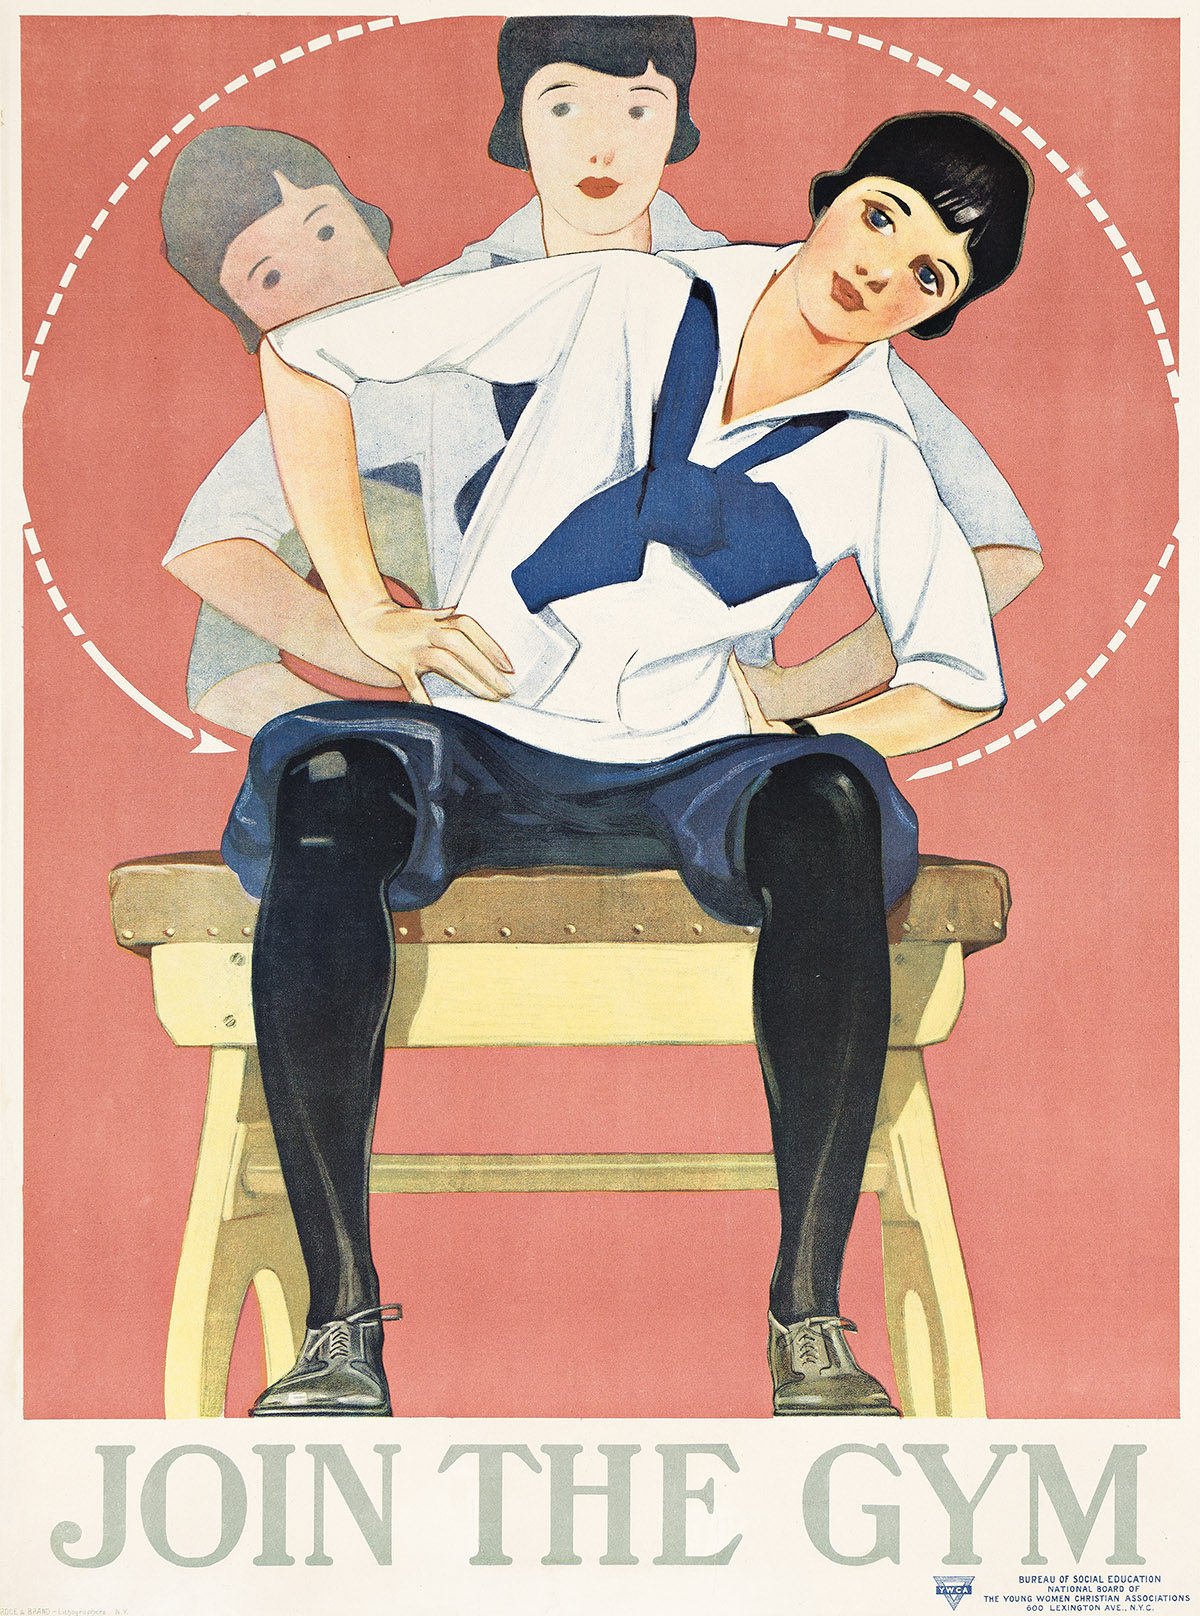 DESIGNER UNKNOWN. JOIN THE GYM / YWCA. Circa 1920s. 26¾x20 inches, 75½x50½ cm. Rode & Brand, New York.